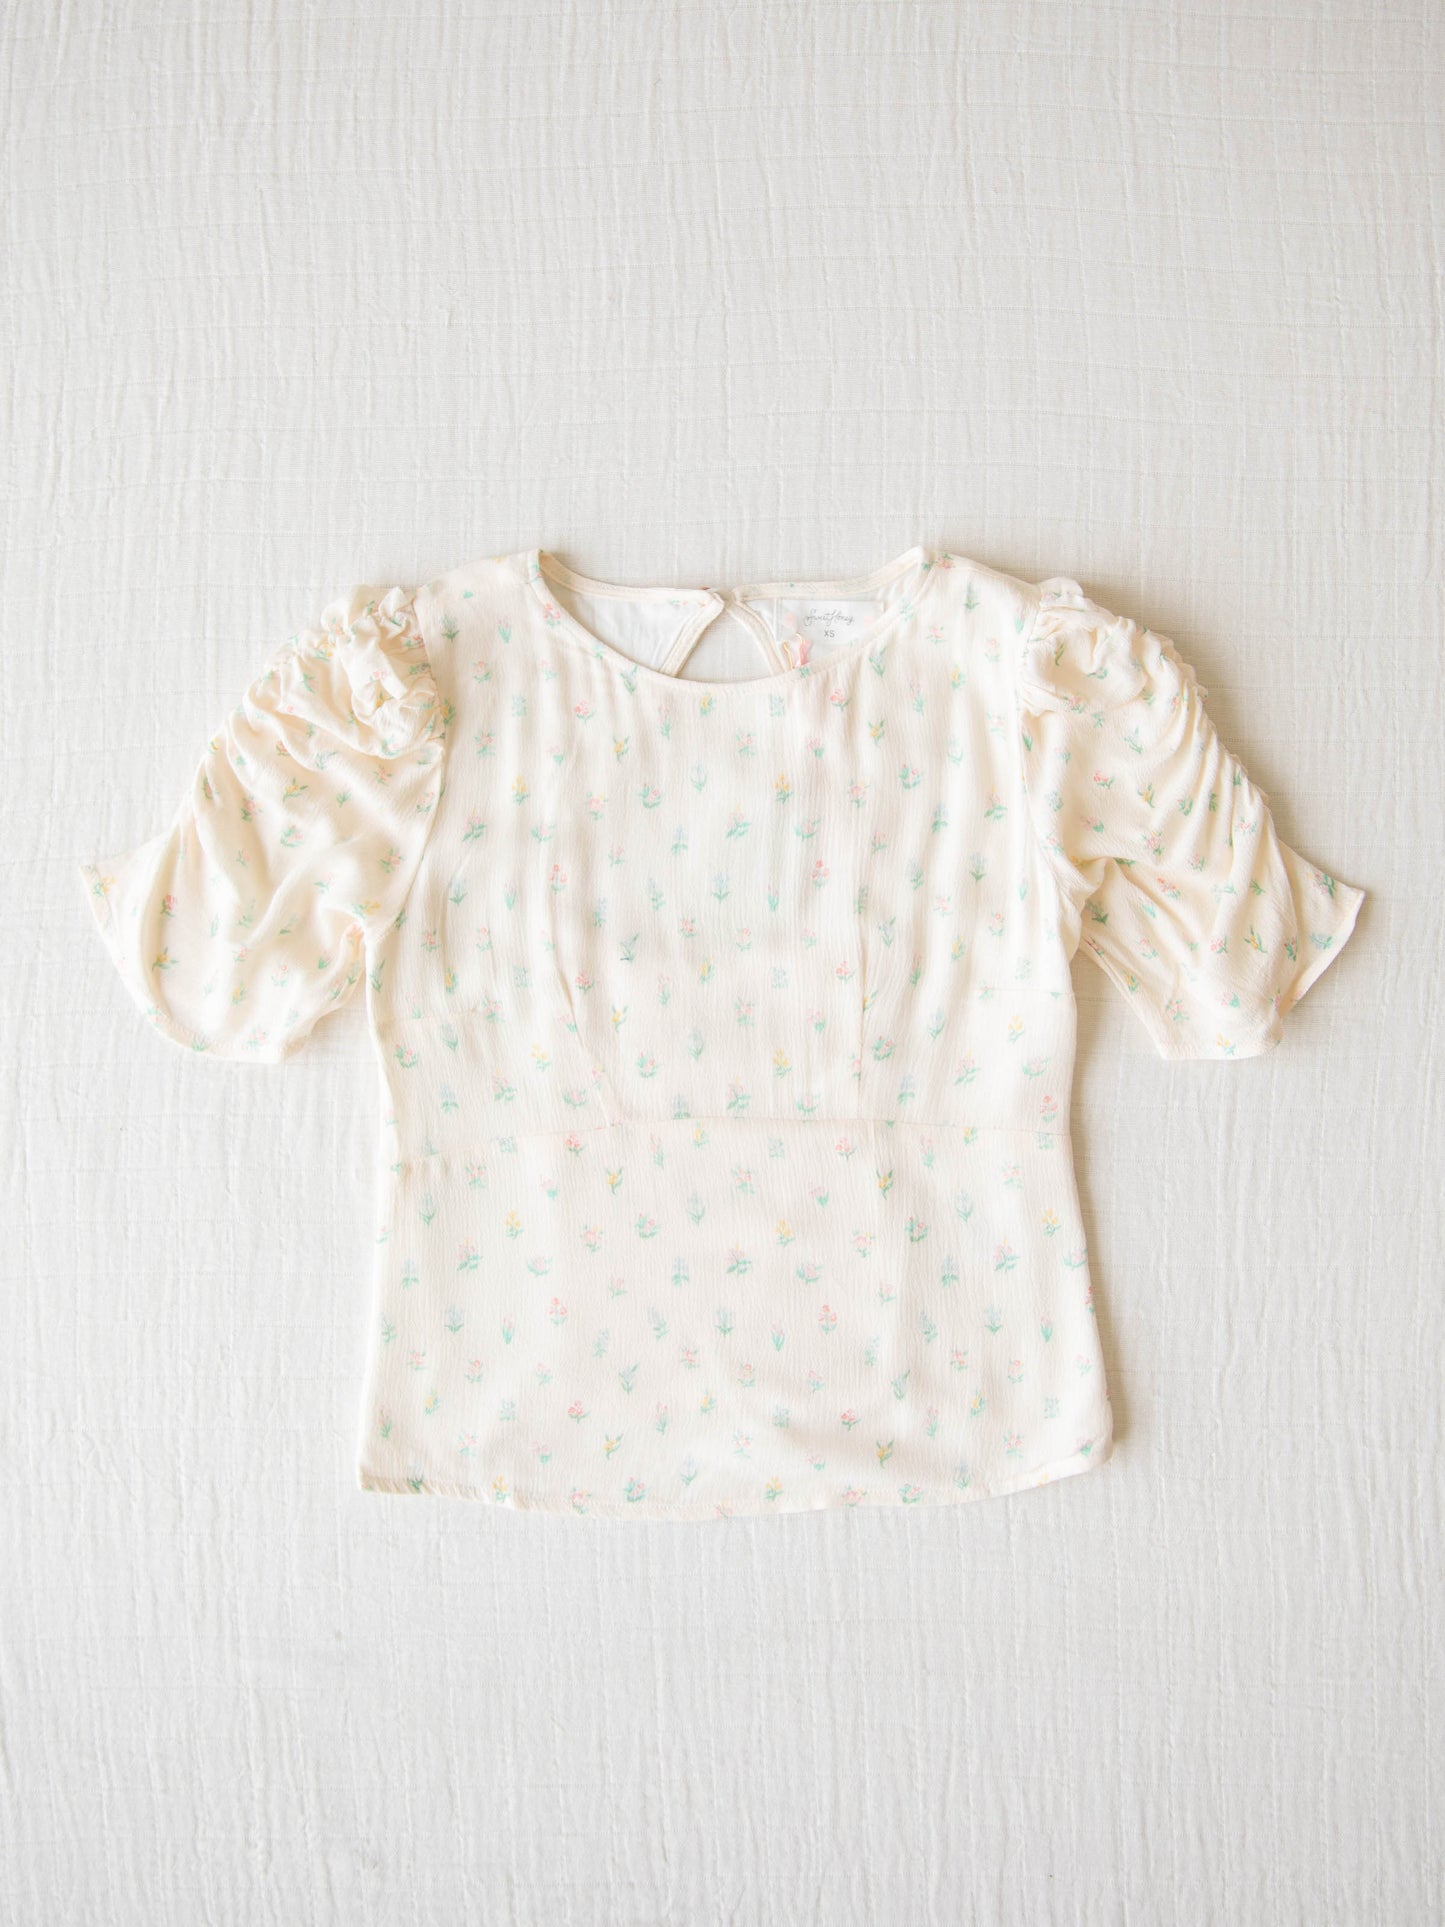 Classic Smocked Cutout Top – Floral Drop. This short sleeve top has a smocked and keyhole back, and synched sleeves. It is a pattern of tiny hand drawn flowers spaced out across a background of cream.